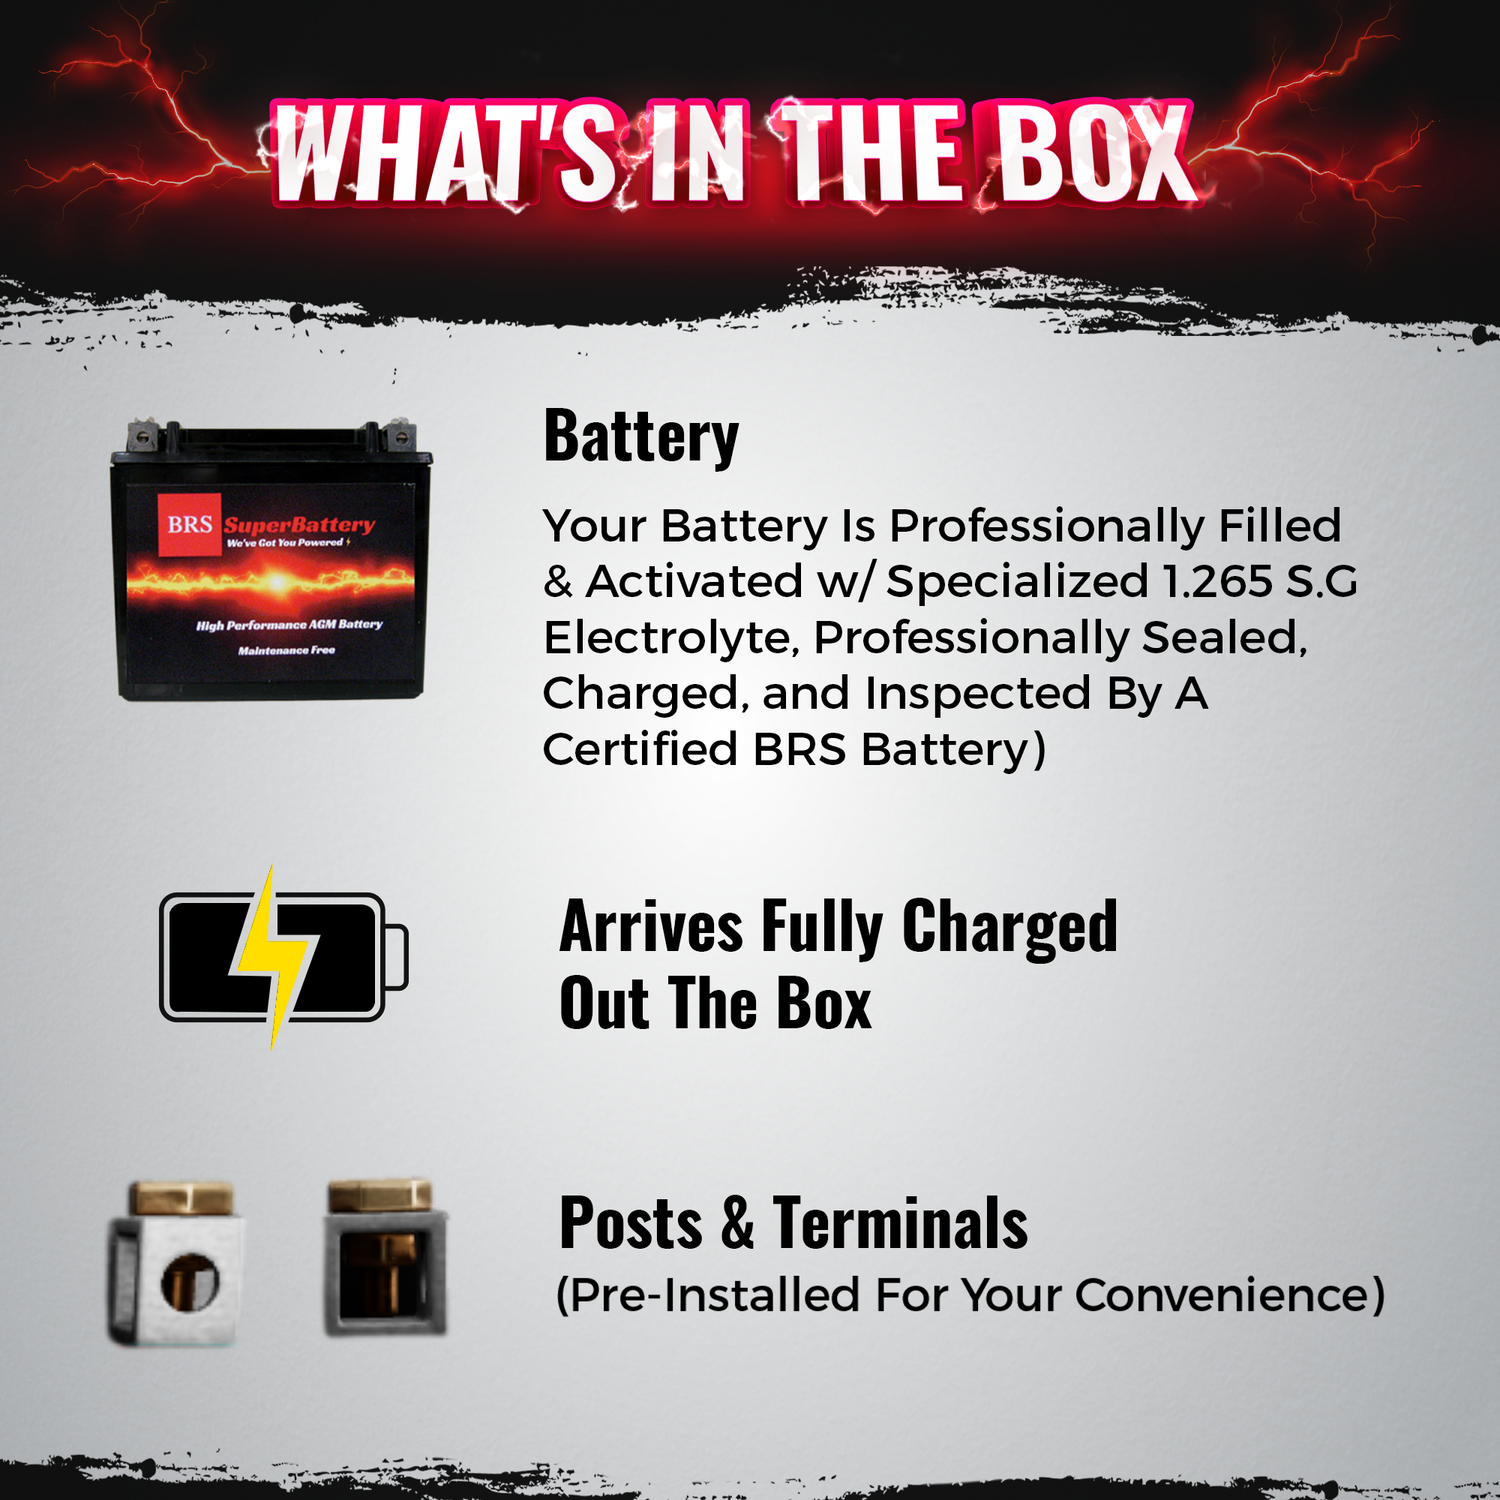 BRS12-BS 30 Day Warranty Battery & Smart Charger / Maintainer Combo Bundle Kit - BRS Super Battery